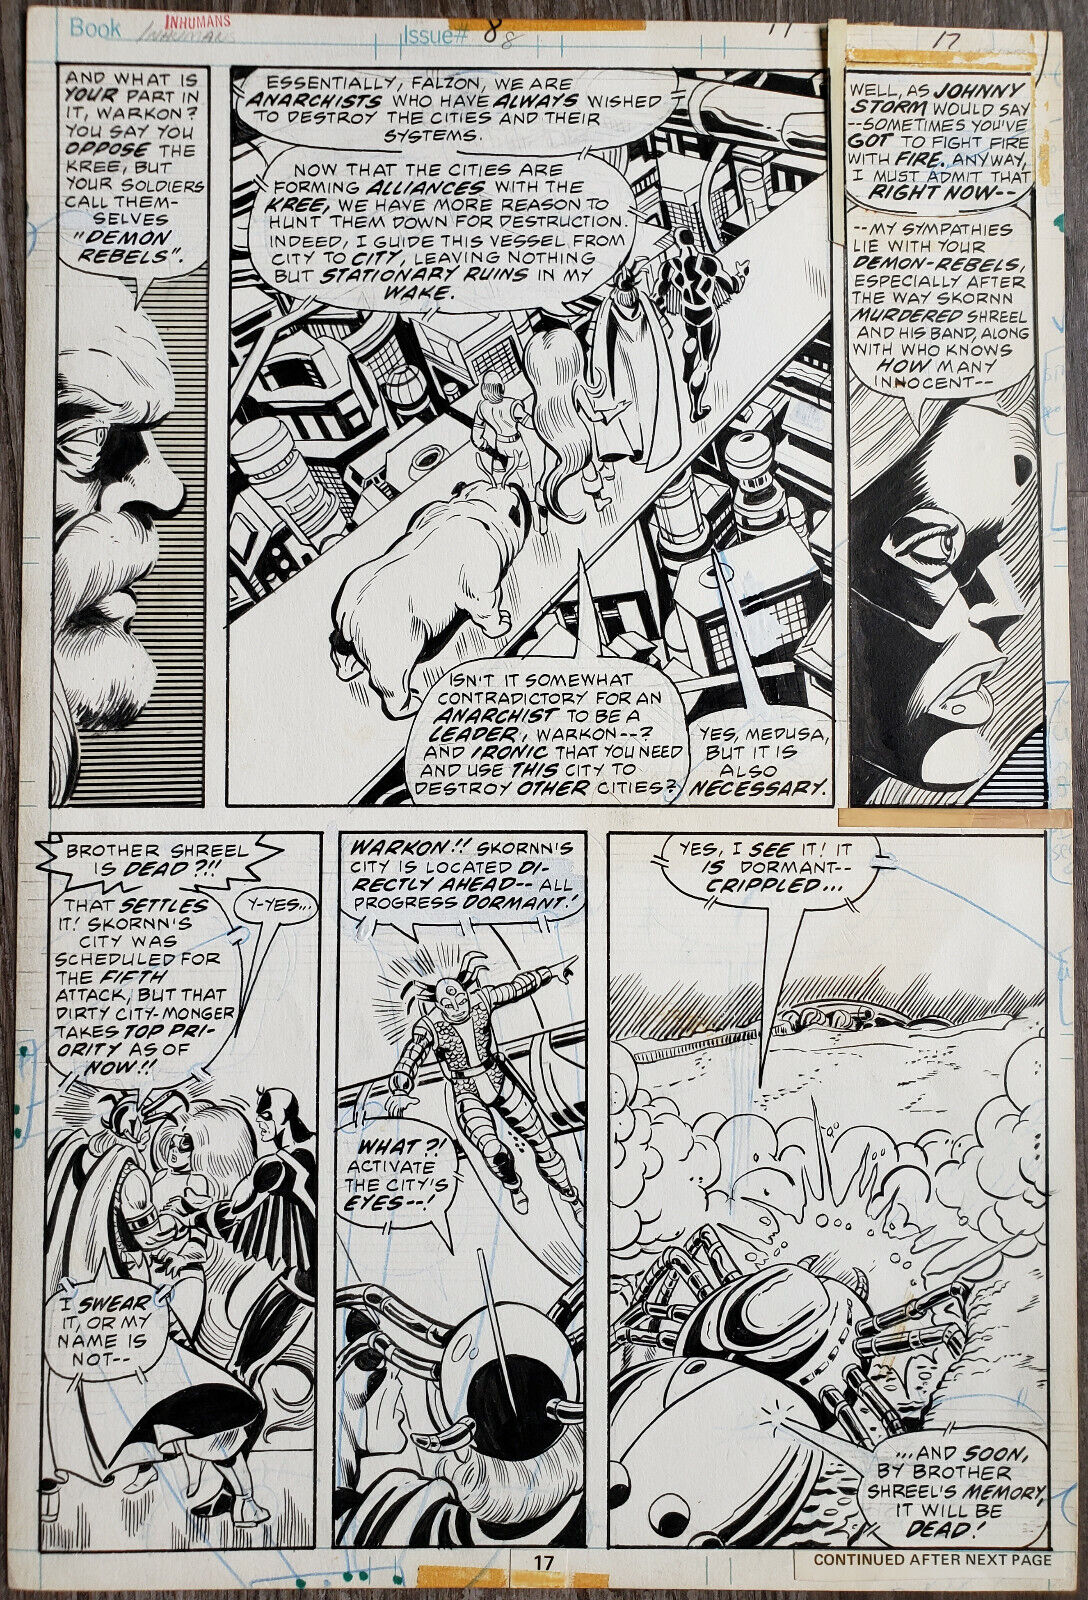 Marvel INHUMANS #8 page 17 Original Art Page by George Perez & Don Perlin (1976)